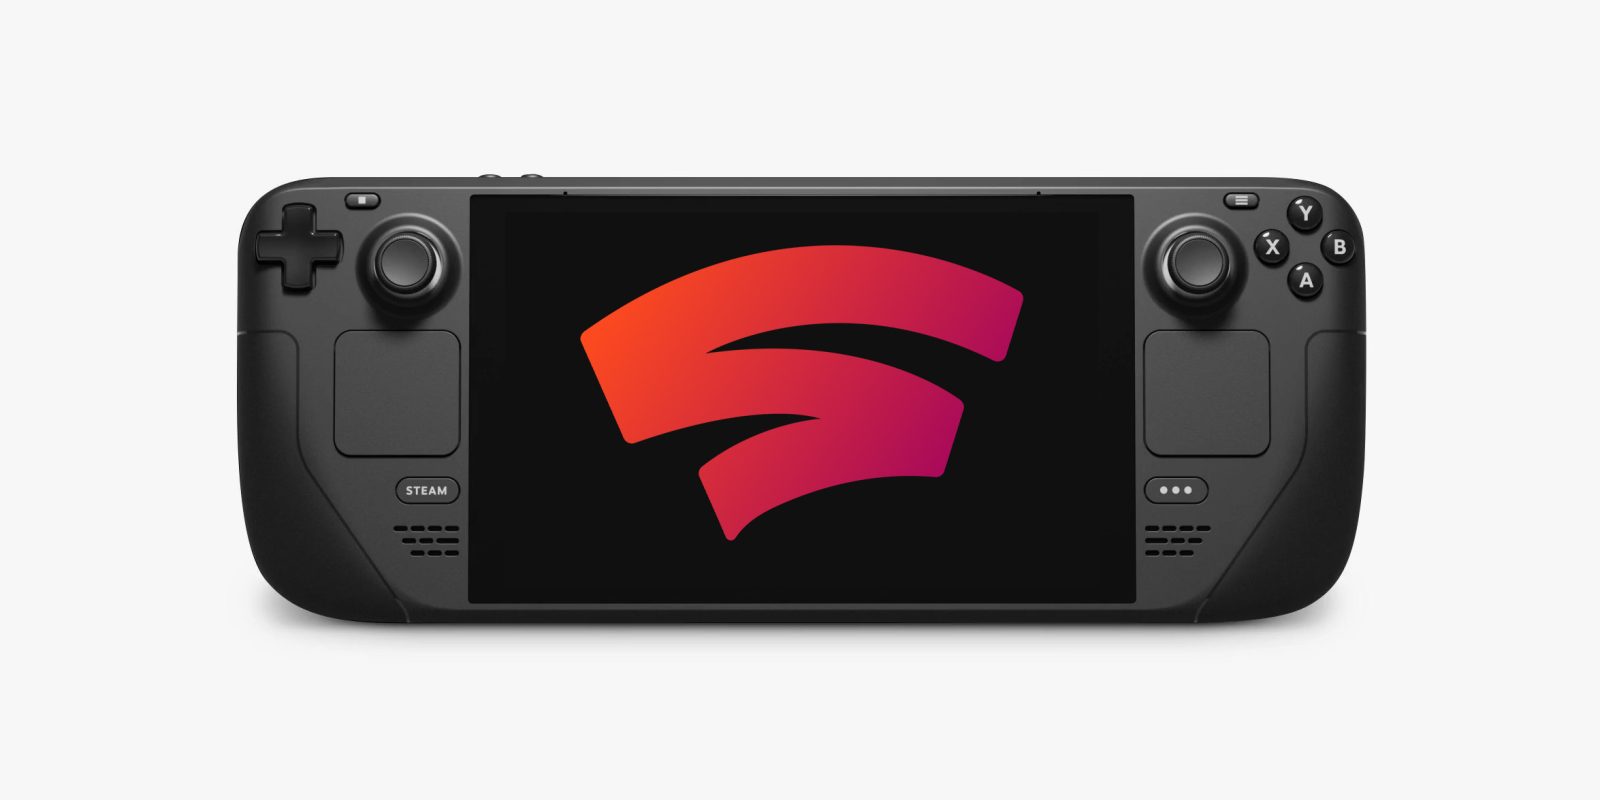 Am I the only one that noticed that Google Play Games for PC looks nearly  identical as Google Stadia for Web Browsers? : r/Stadia